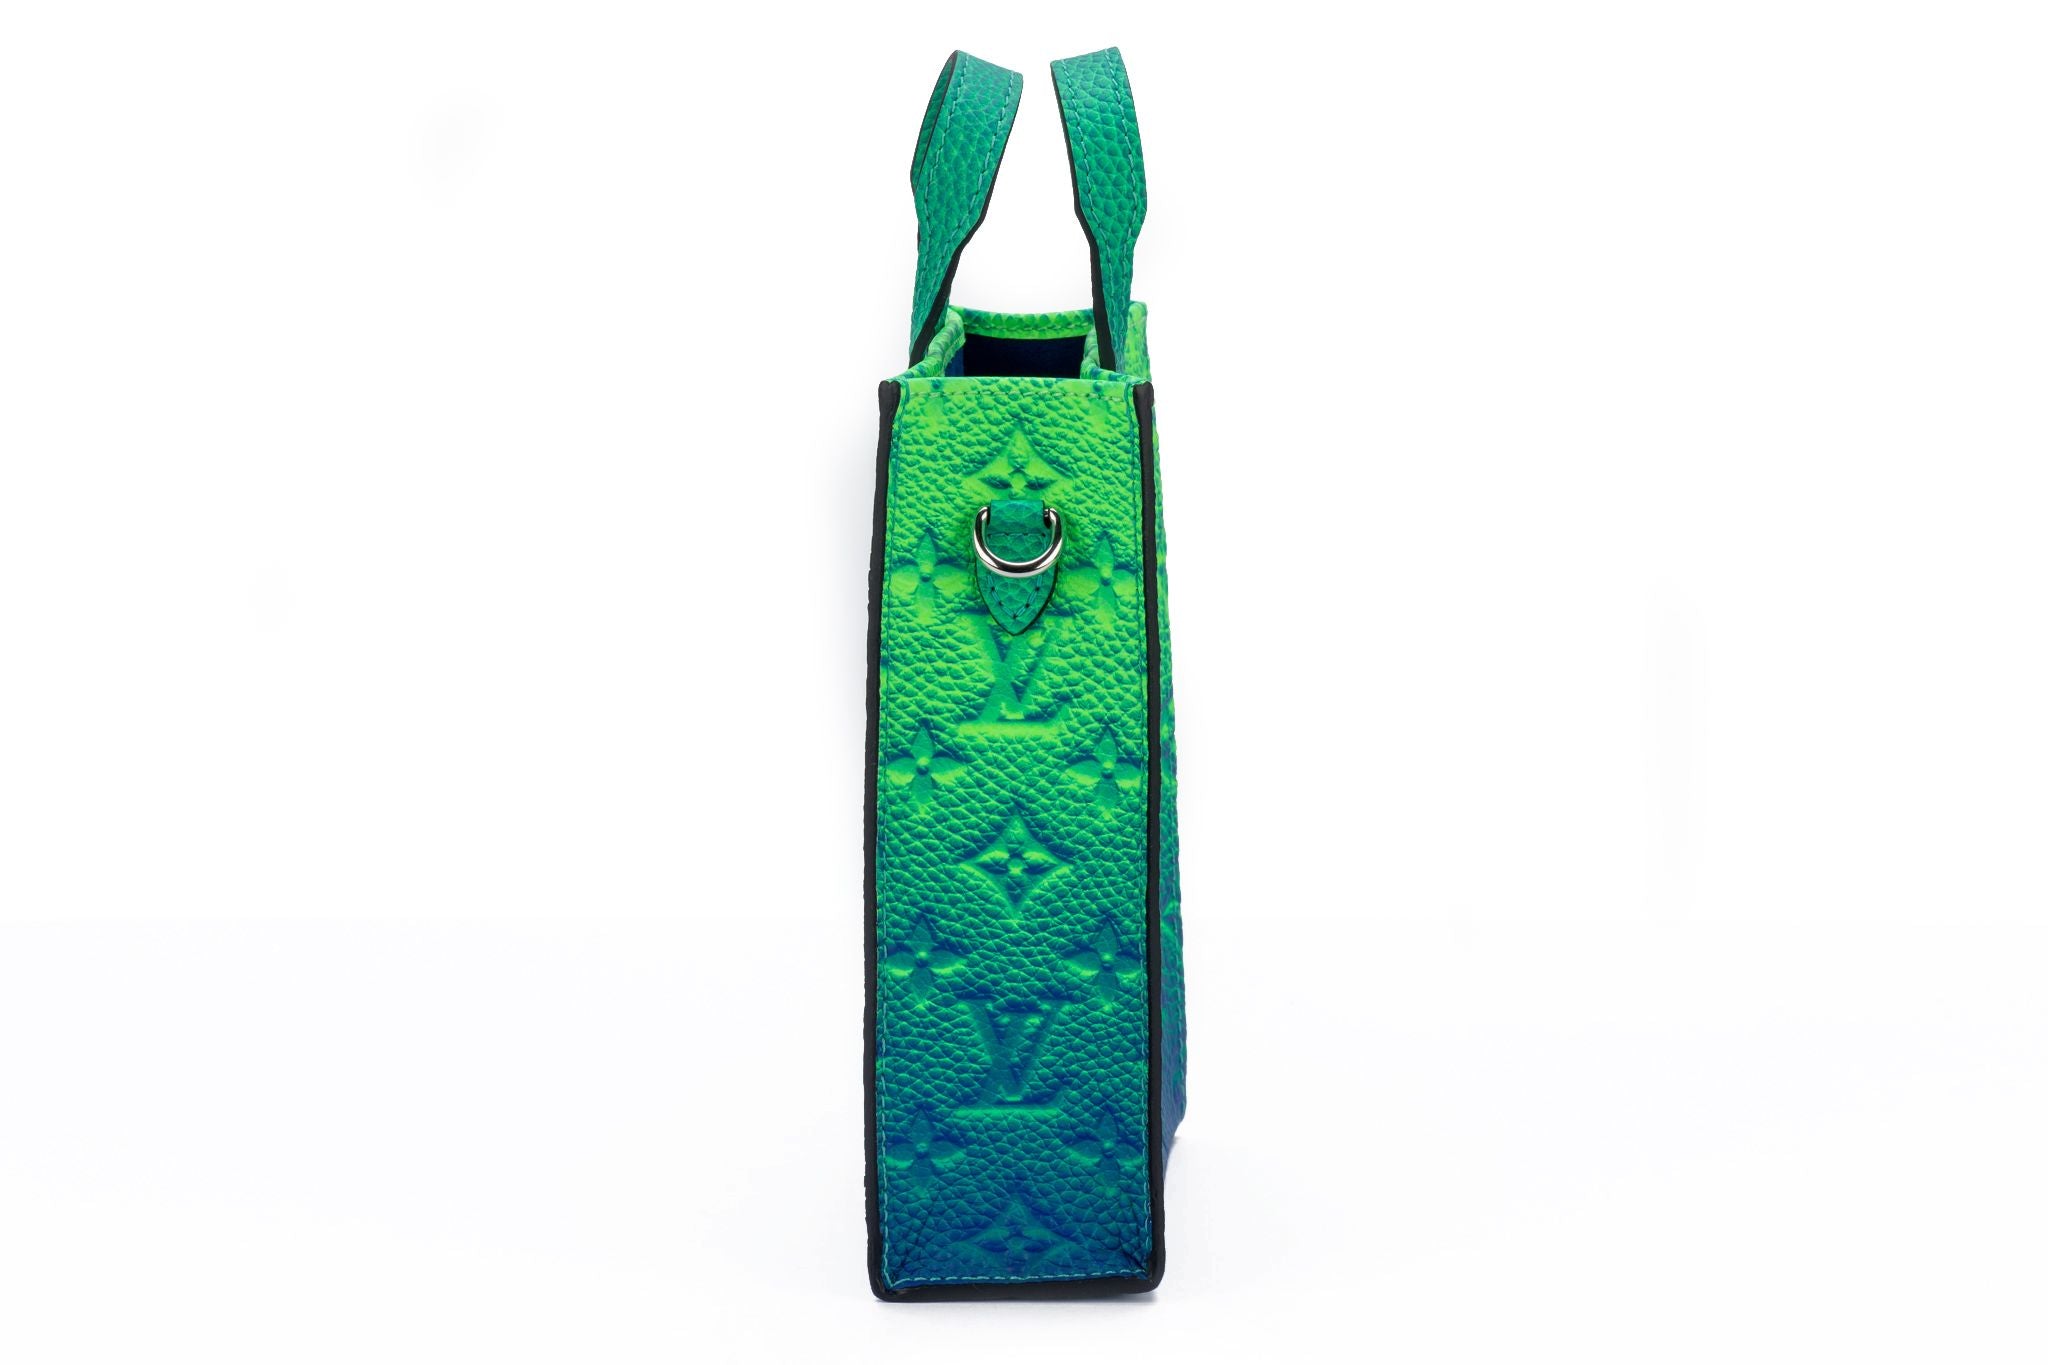 Fashion Bomb Daily - Would you rock the highly coveted green and blue ombré  @louisvuitton mini Sac Plat bag designed by @virgilabloh .Hot! Or Hmm…? *  Want to advertise your #accessories brand